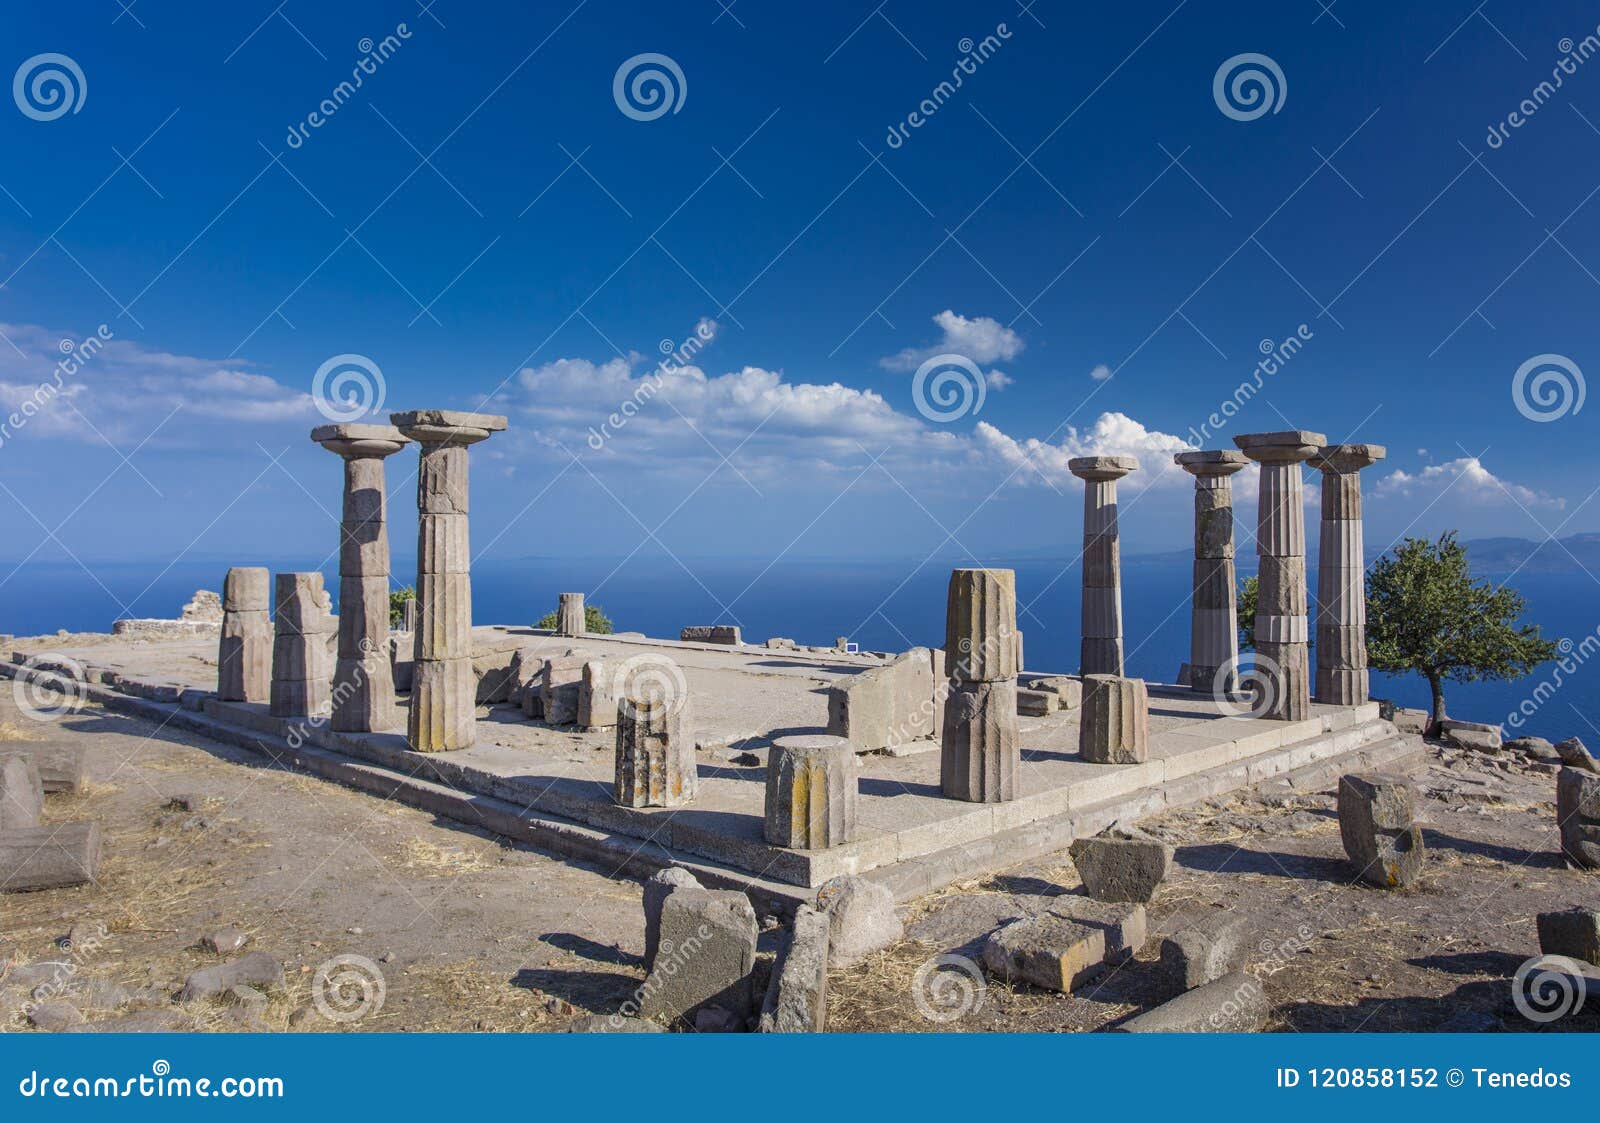 temple of athena in assos, canakkale, turkey